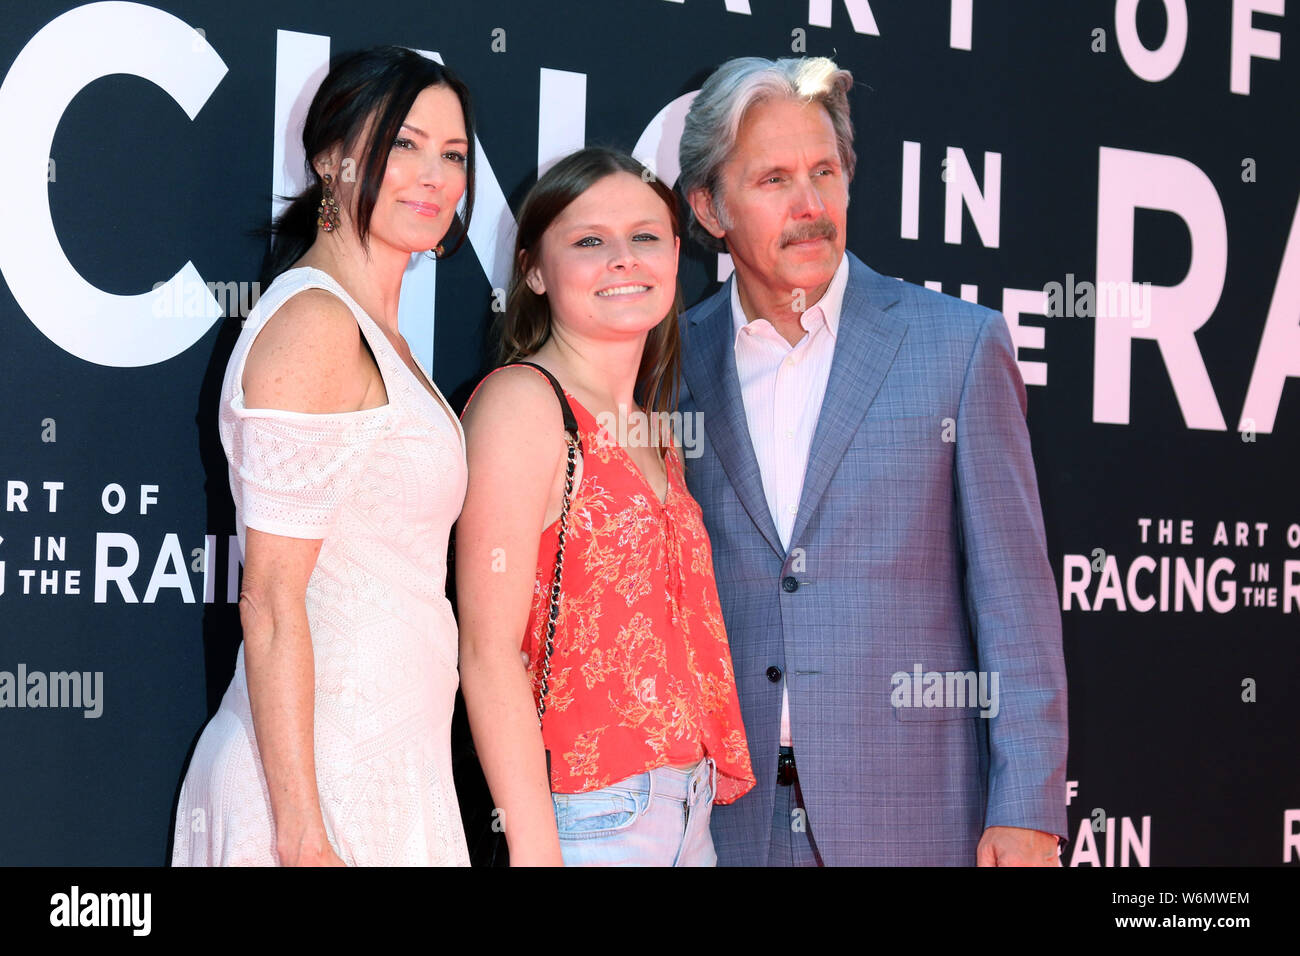 August 1, 2019, Los Angeles, CA, USA: LOS ANGELES - AUG 1:  Guest, Mary Cole, Gary Cole at the ''The Art of Racing in the Rain'' World Premiere at the El Capitan Theater on August 1, 2019 in Los Angeles, CA (Credit Image: © Kay Blake/ZUMA Wire) Stock Photo